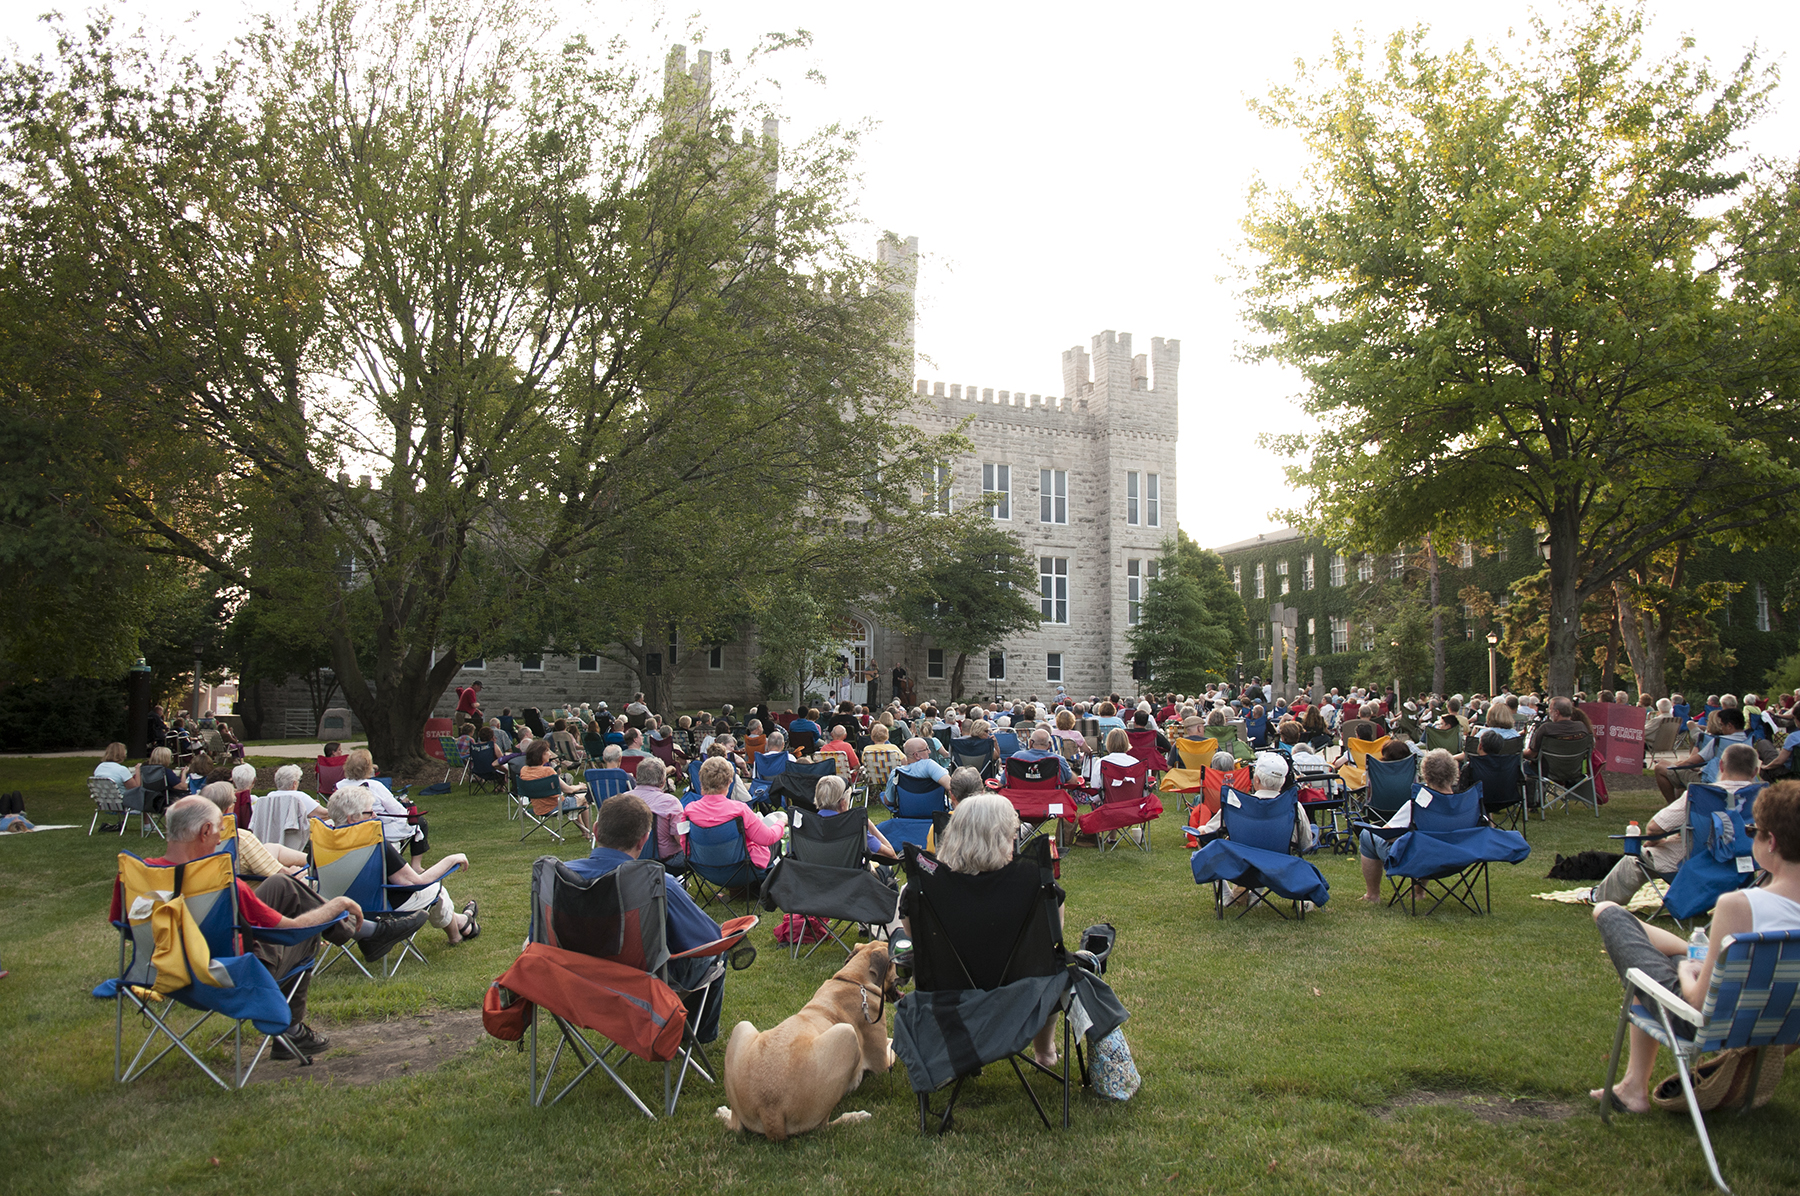 Concertgoers (and pets) enjoy the annual Concerts on the Quad series.